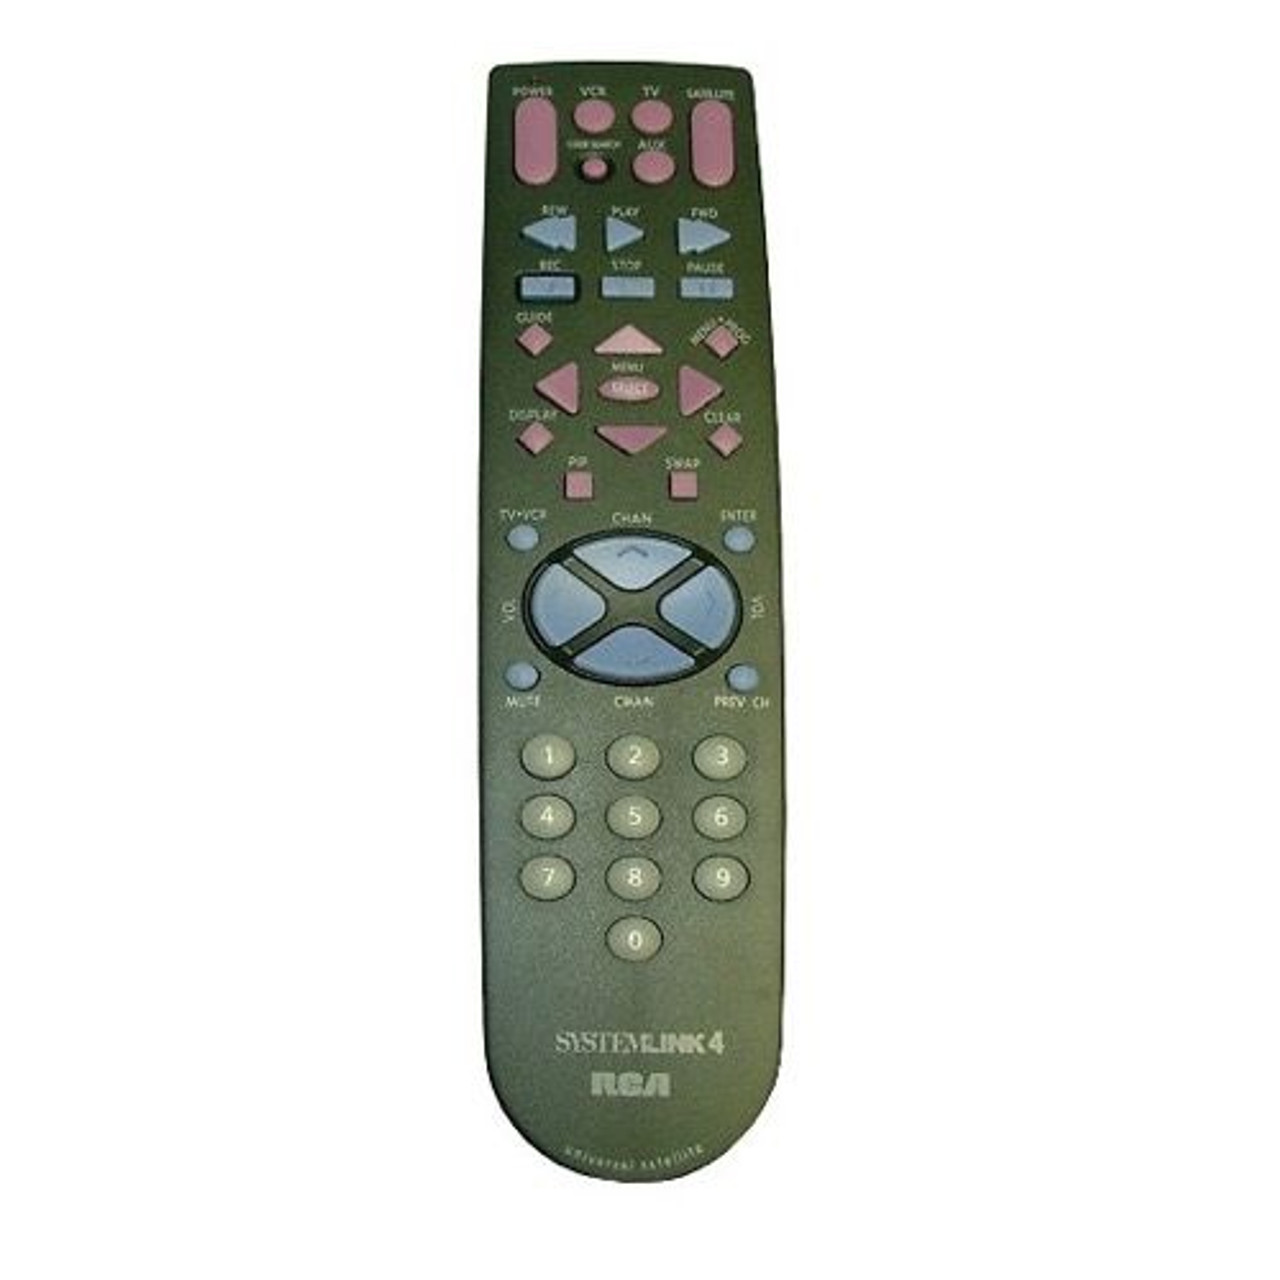 4-Device Universal Remote Control RCA Replacement Dish Net TV Remote Control Systemlink 4 Device Satellite Receiver Digital Cable DIRECTV, Part # RCSAT1-A